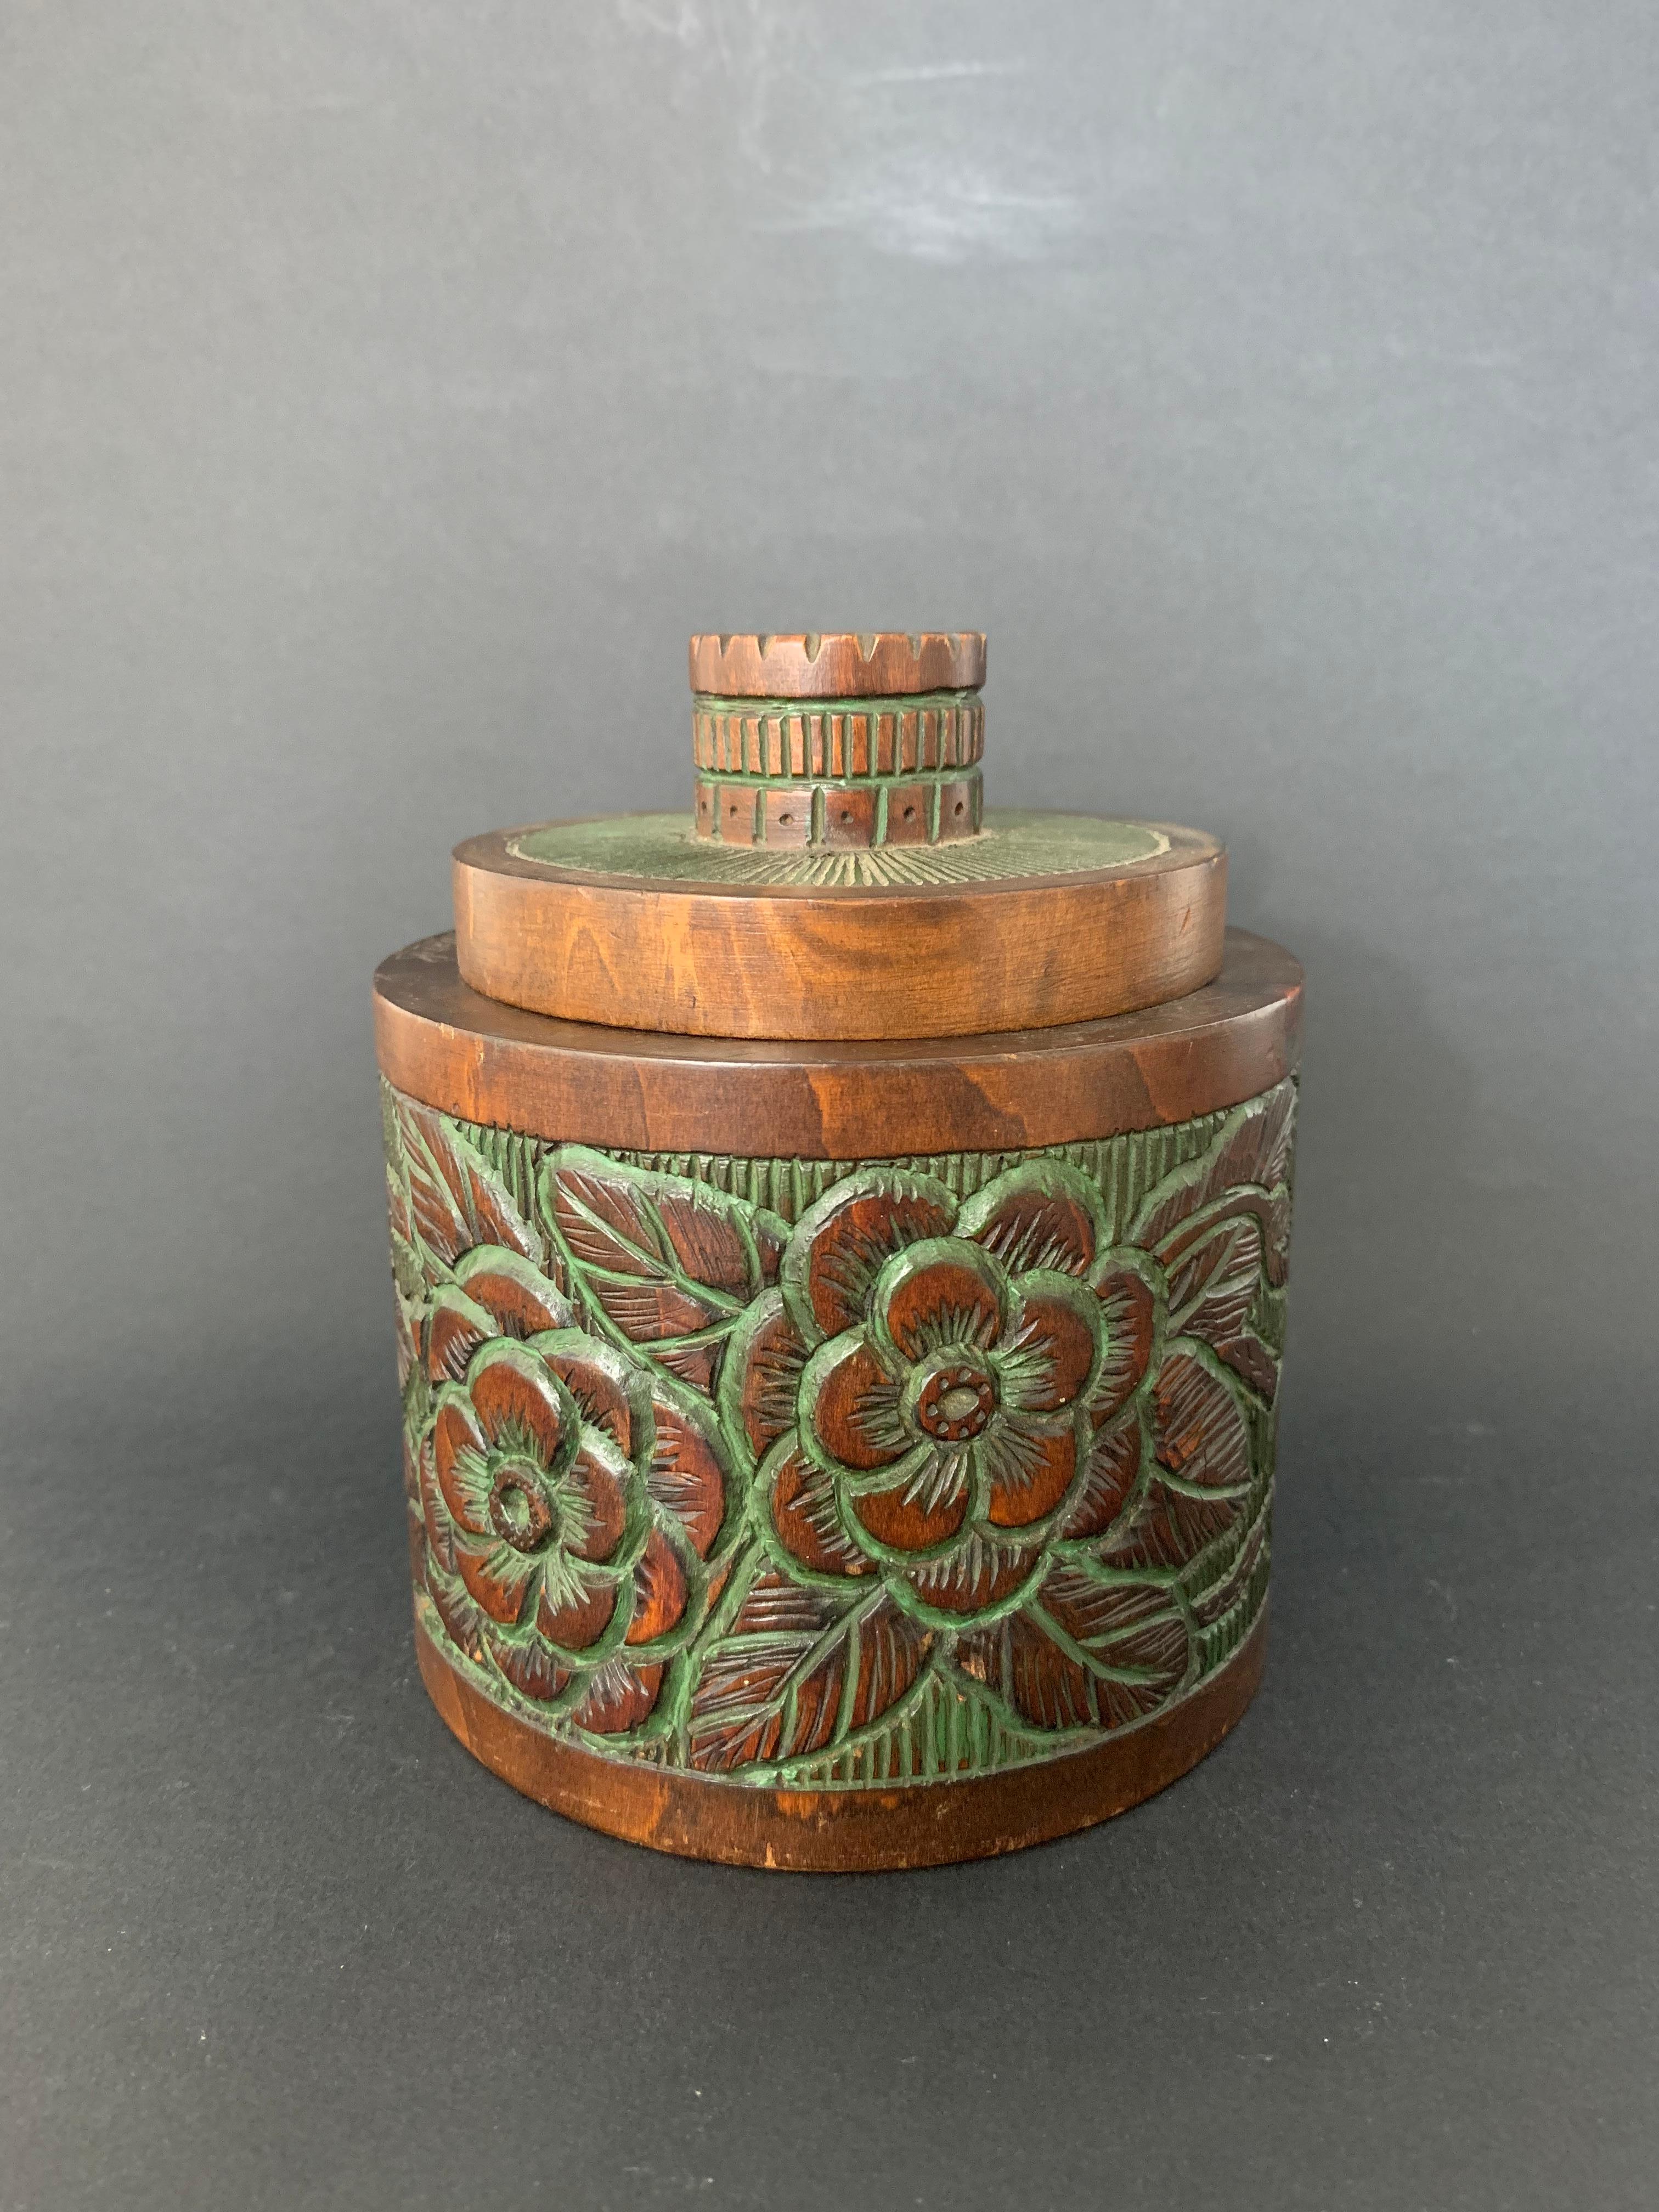 Art deco tobacco pot  richly carved with plant elements (flowers, leaves ...). Very nice quality of execution with fine lines. A layer of green paint has been applied in the hollows of the box. This box can for example be a very nice tea box. 
The